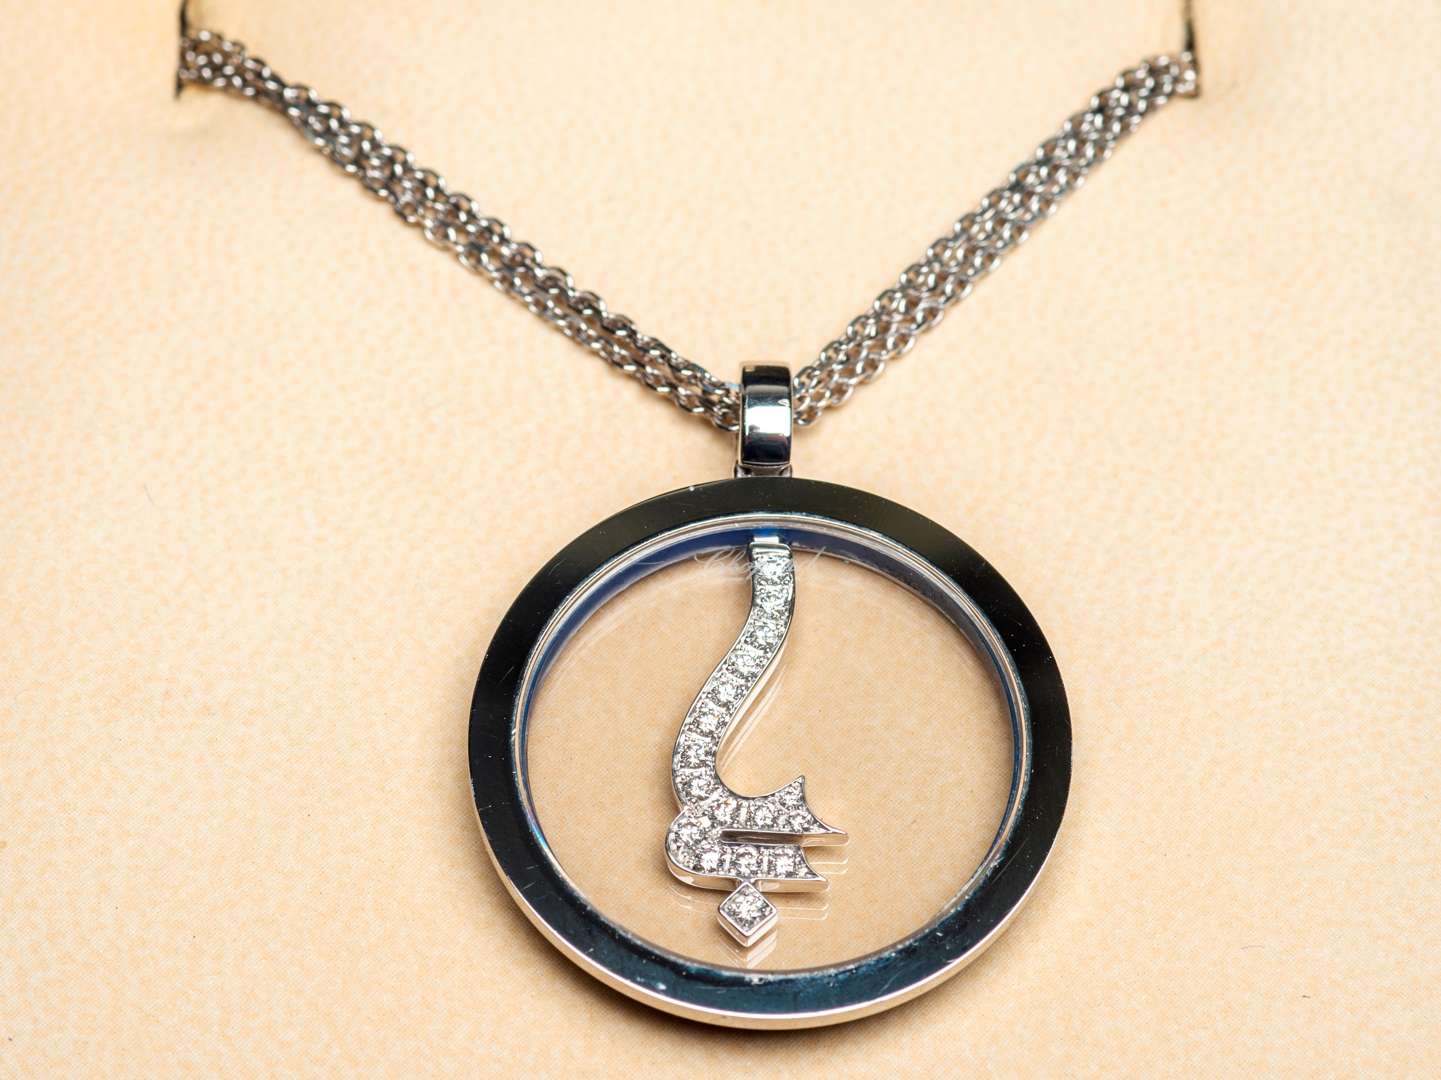 <p>CHOPARD for GODOLPHIN, a modern 18ct white gold and diamond set pendant and chain</p>